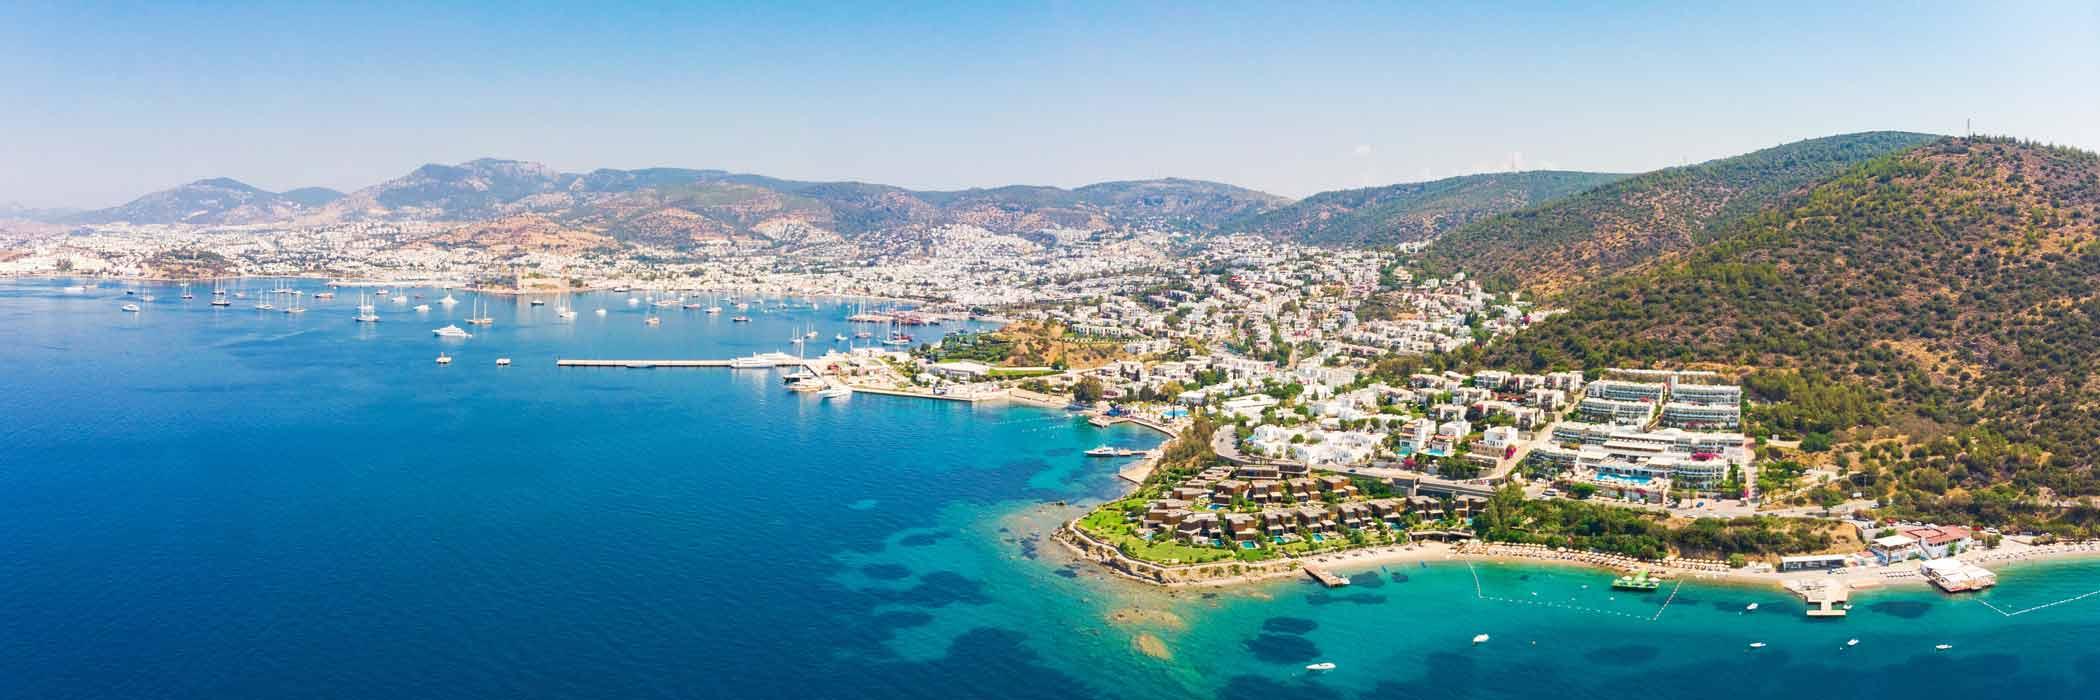 Cheap holidays and Breaks - Bodrum Turkey